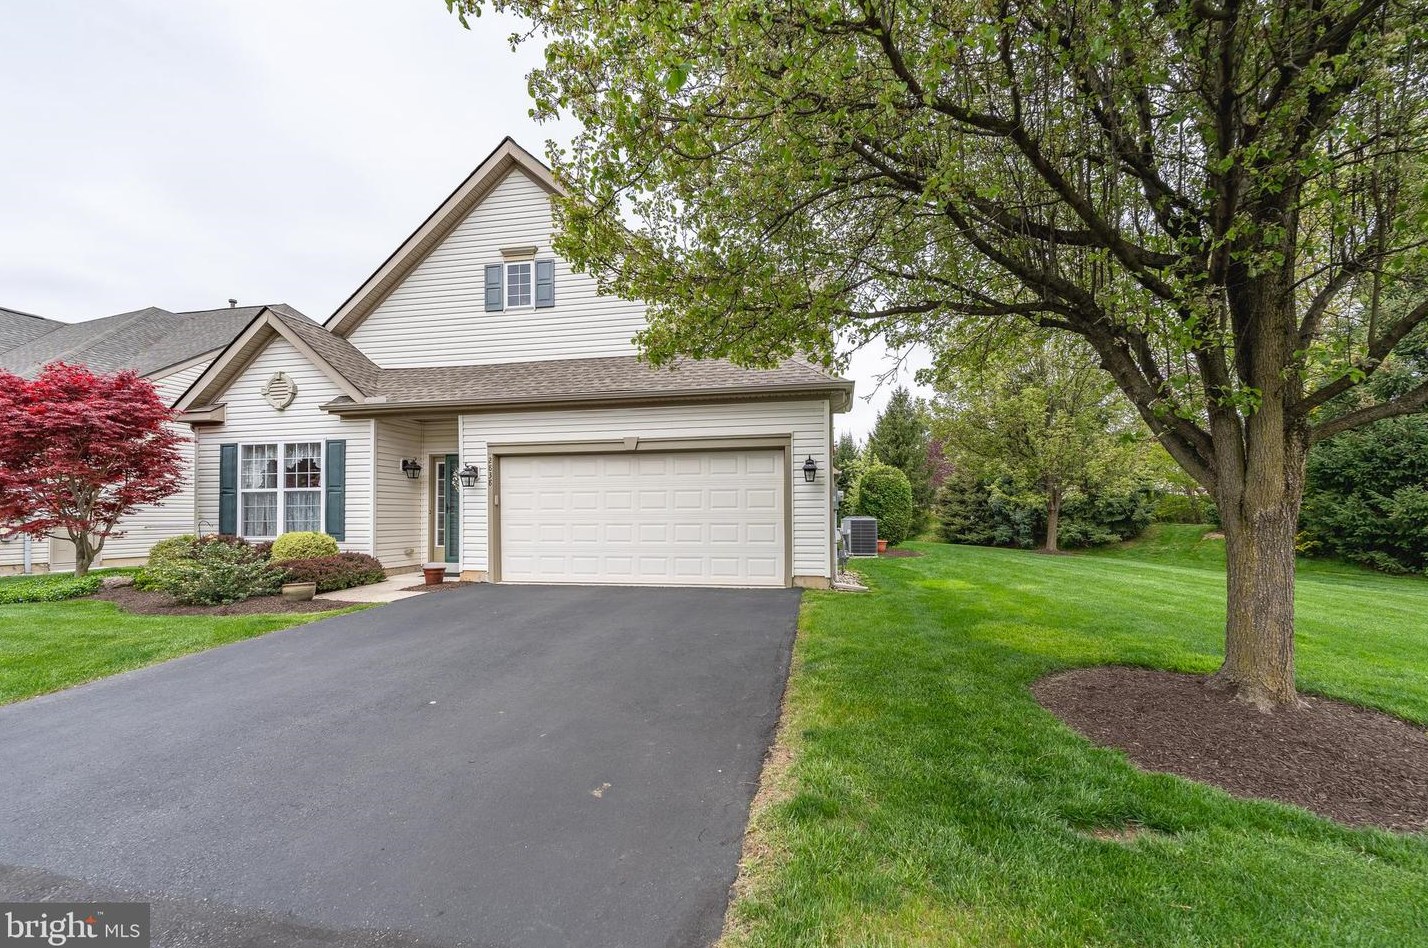 2838 Donegal Dr, Macungie, PA 18062